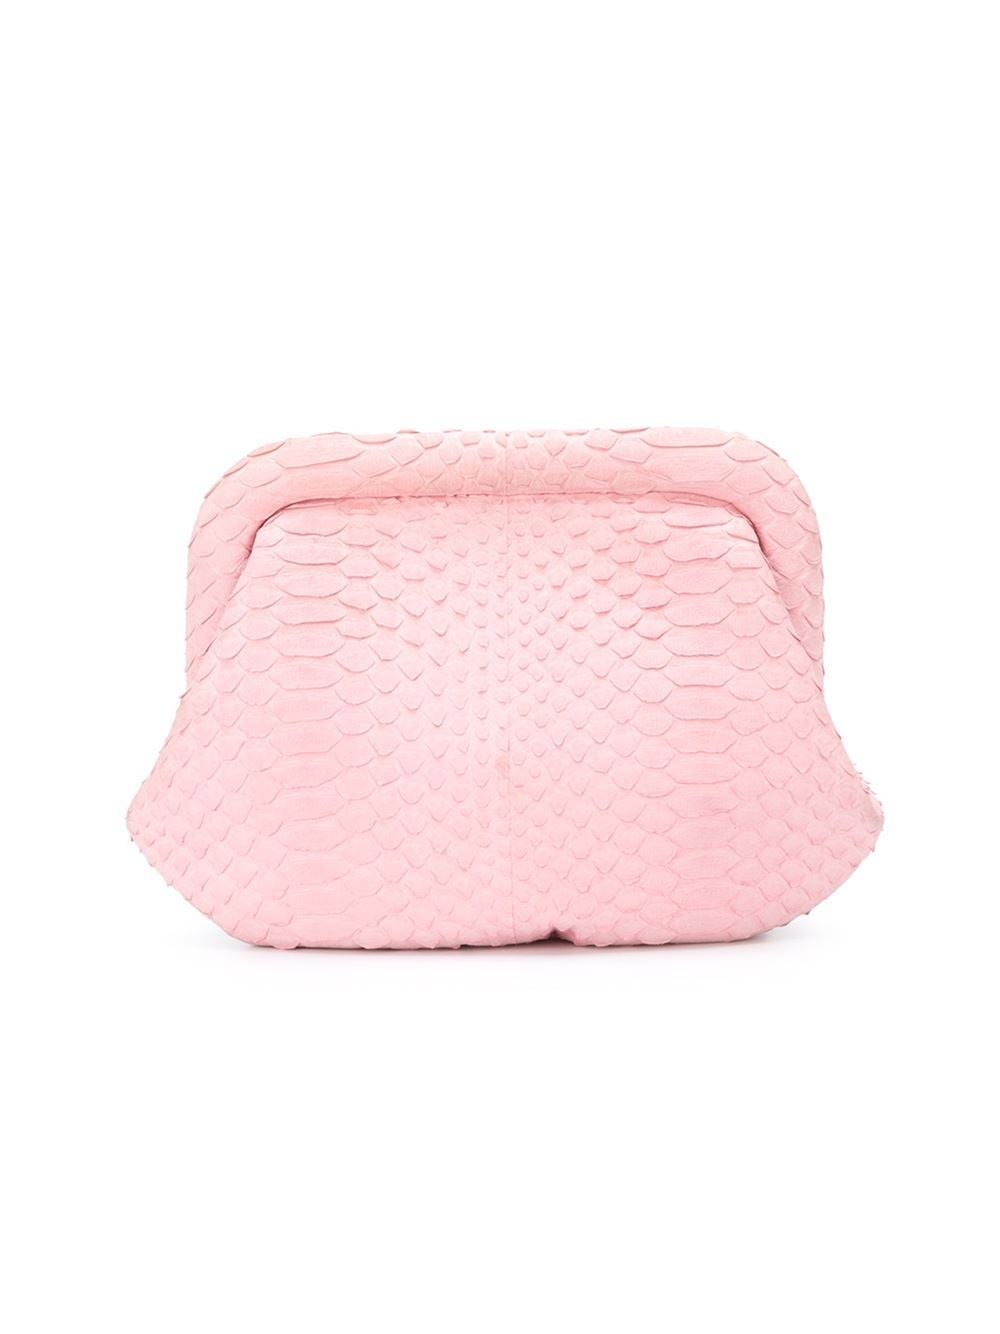 Pink Chanel Small Python Clutch